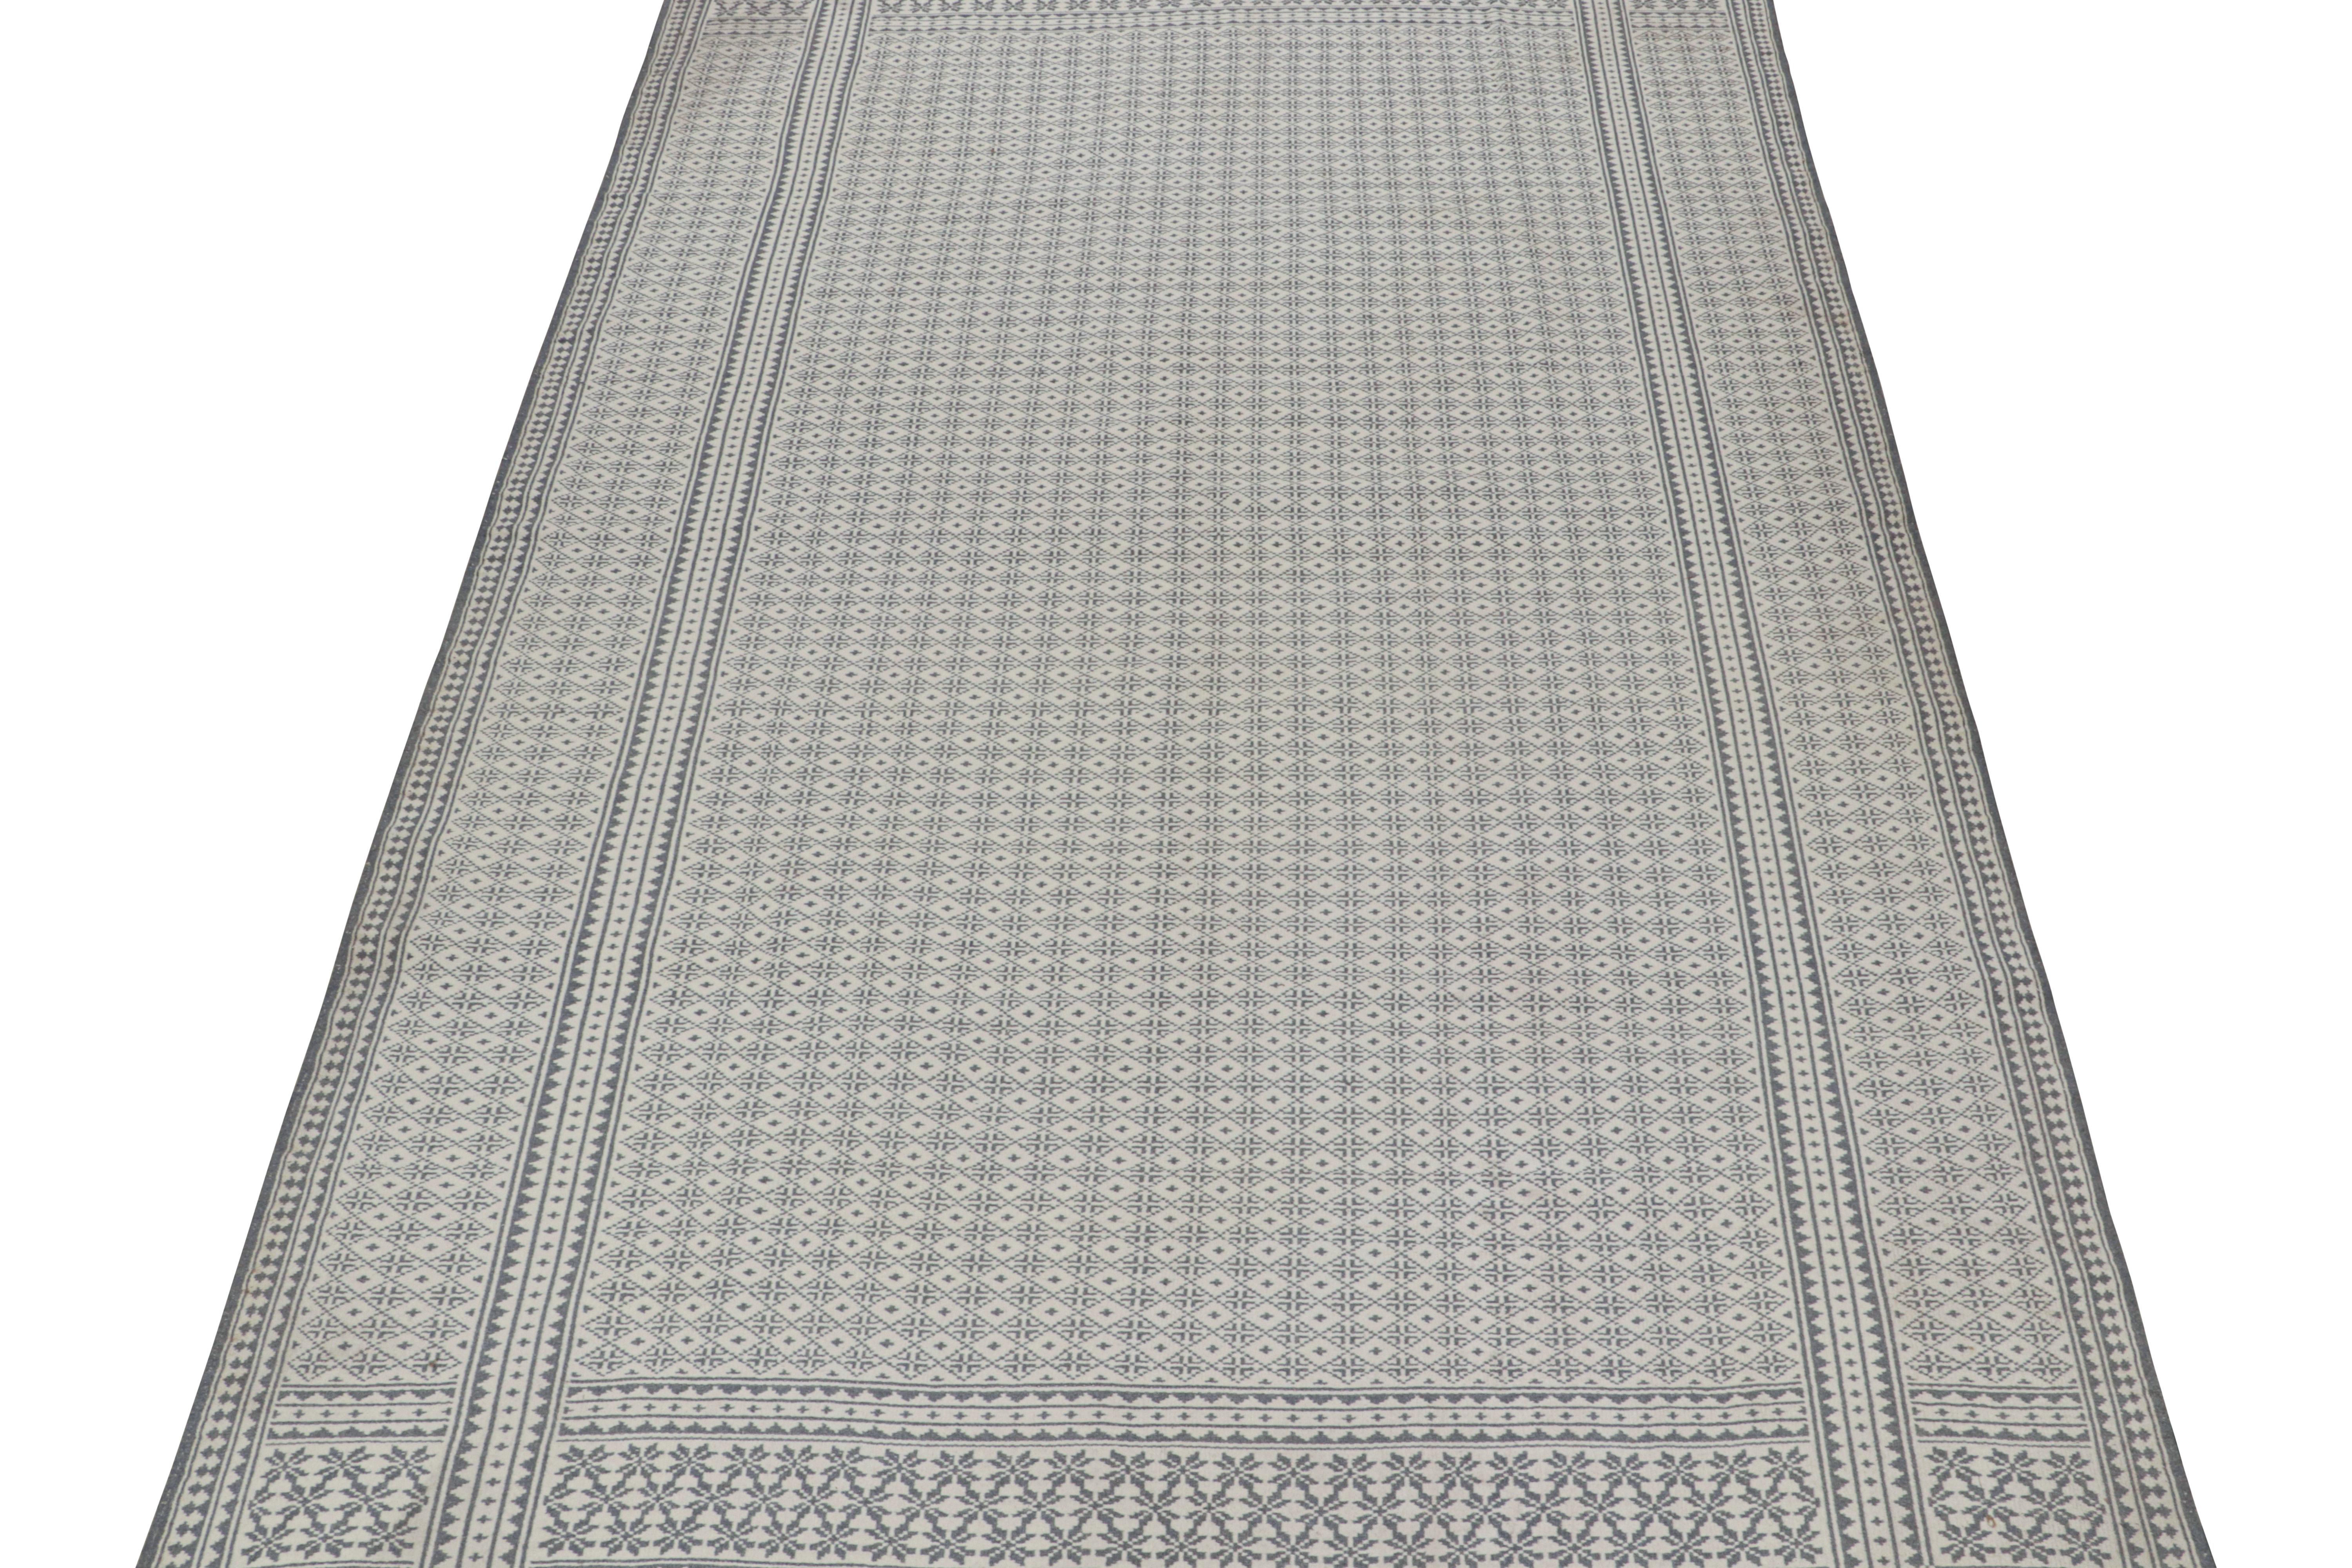 Hand-Woven Rug & Kilim’s Zilu Style Kilim in White and Blue-Gray Geometric Pattern  For Sale